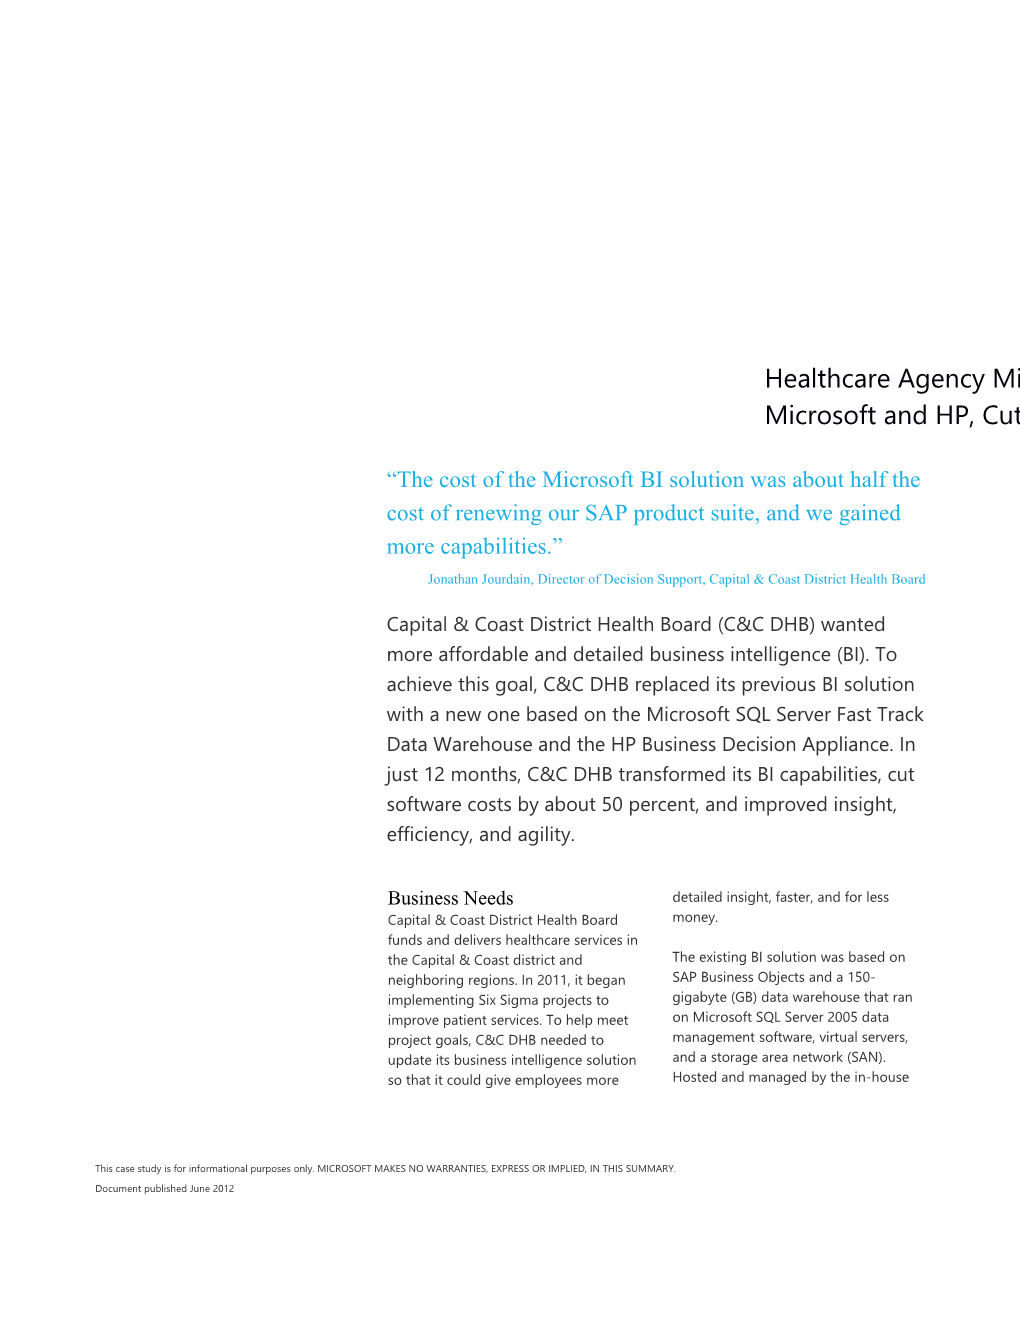 Healthcare Agency Migrates from SAP to Microsoft and HP, Cuts BI Costs in Half